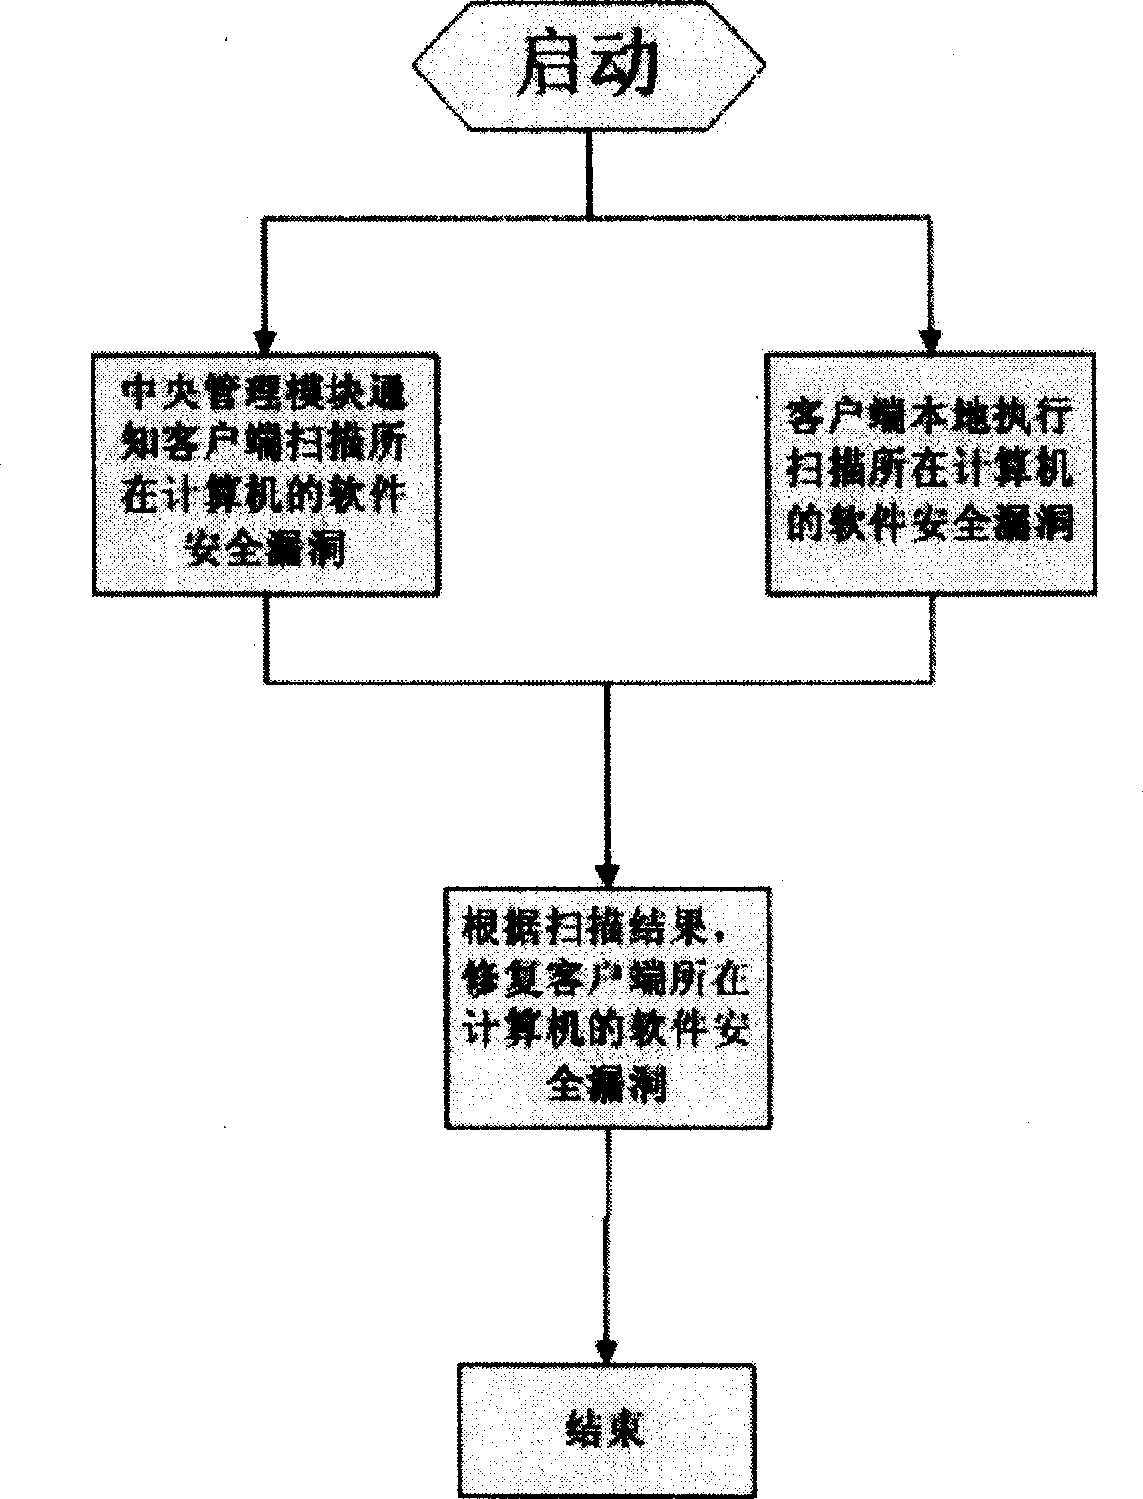 Computer software security loophole repairing apparatus and method